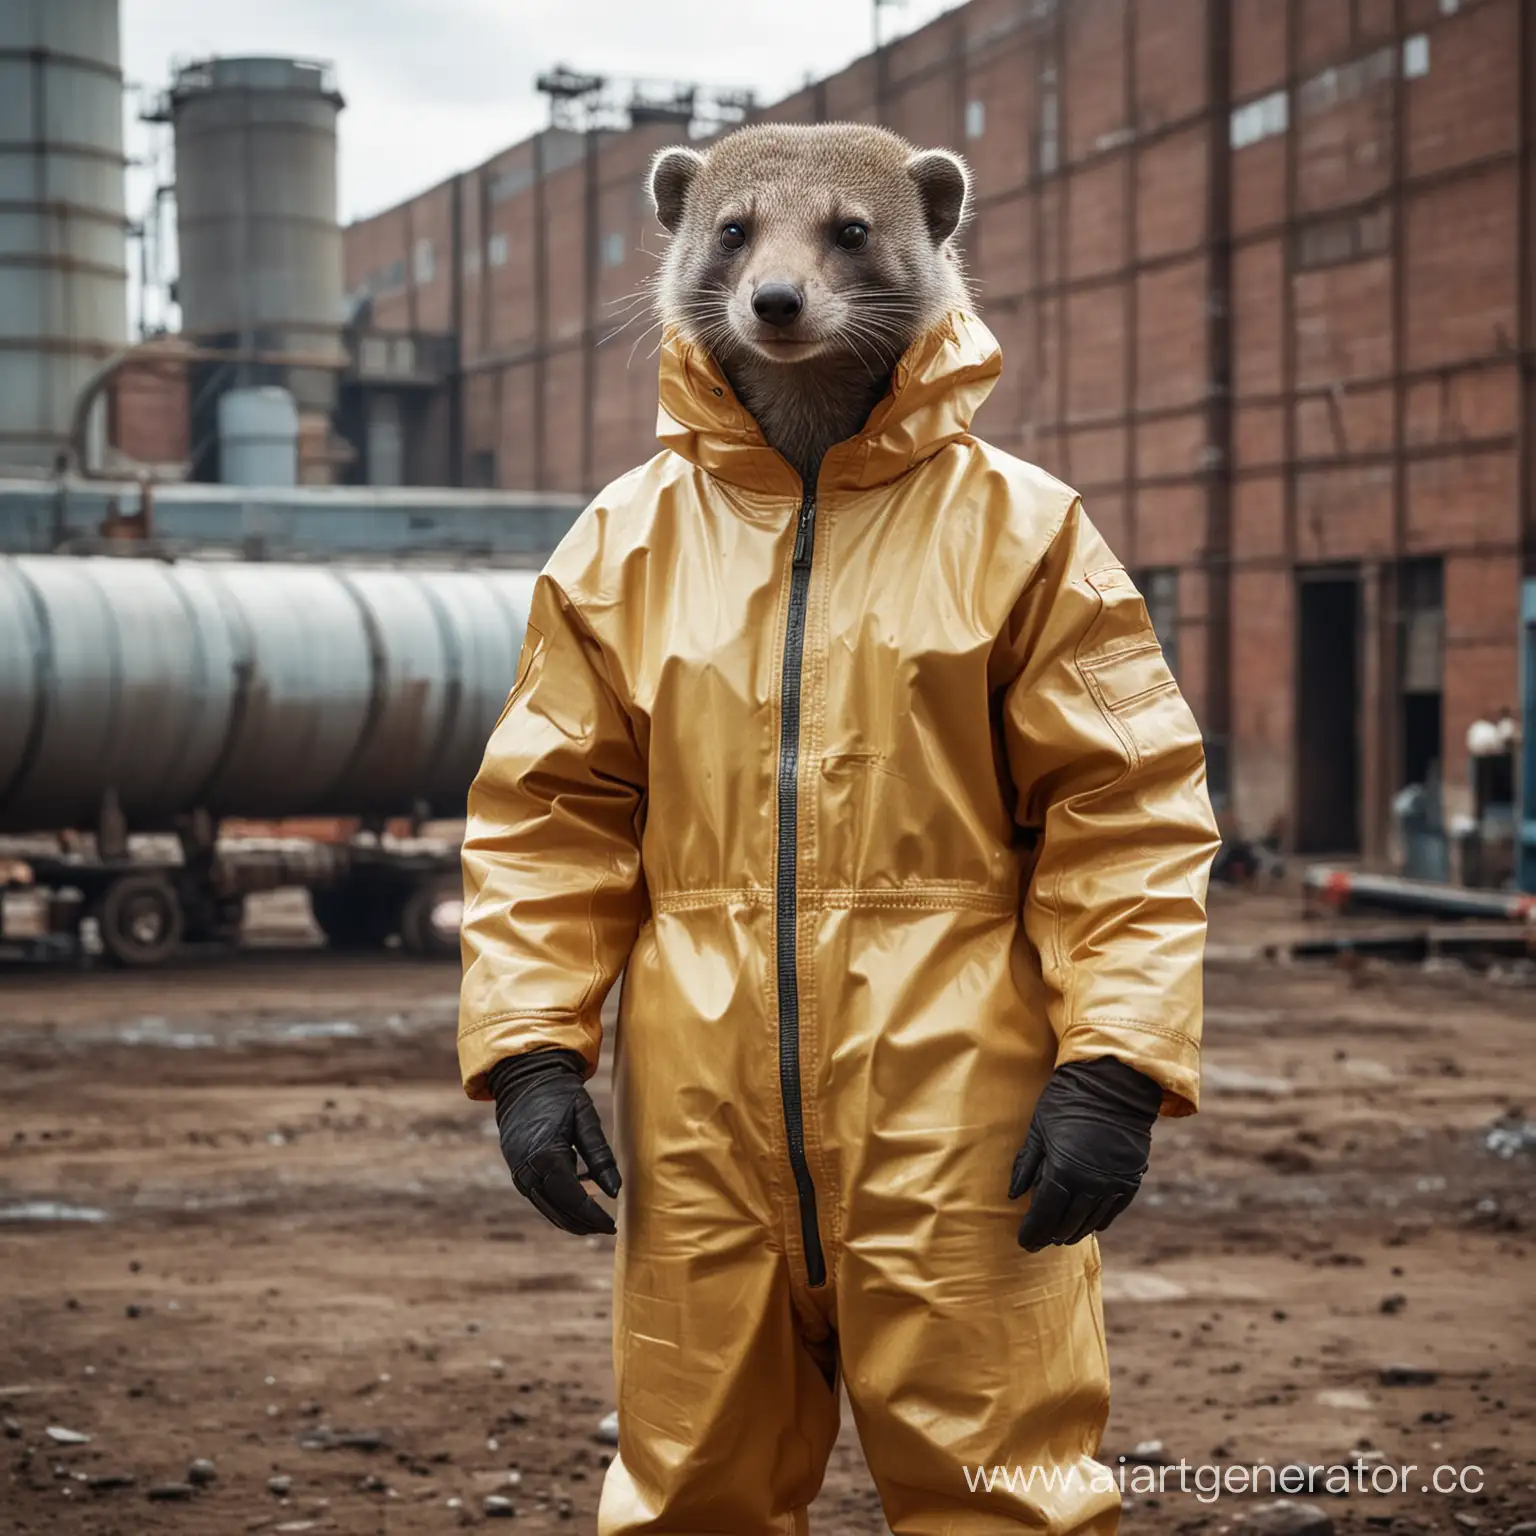 Radiation-Protected-Mongoose-in-Industrial-Setting